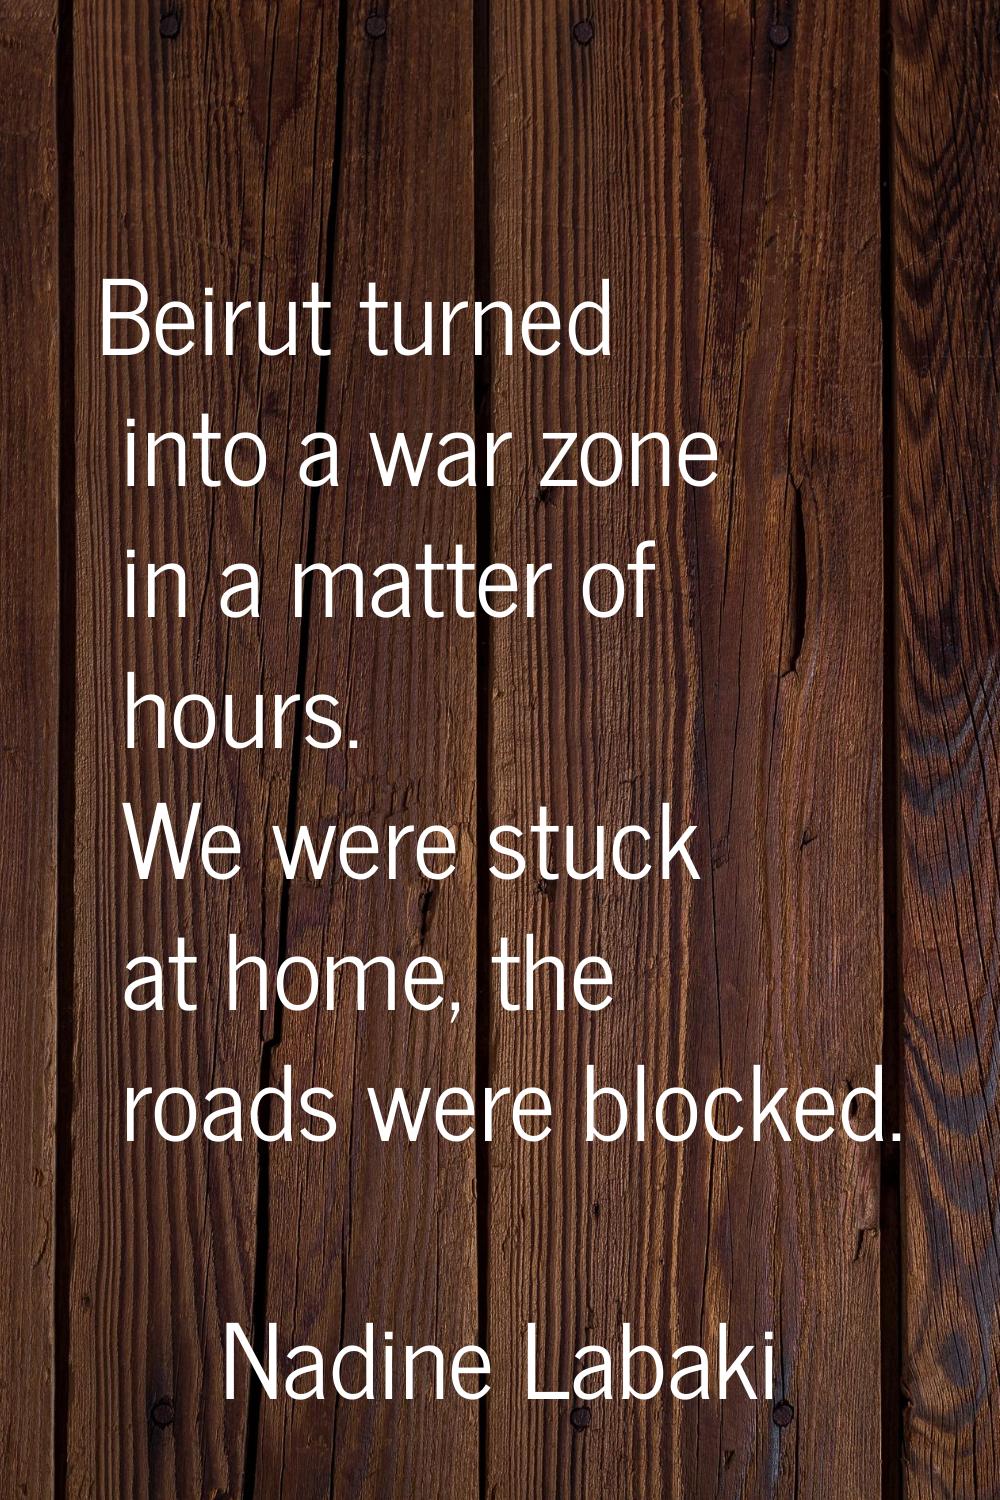 Beirut turned into a war zone in a matter of hours. We were stuck at home, the roads were blocked.